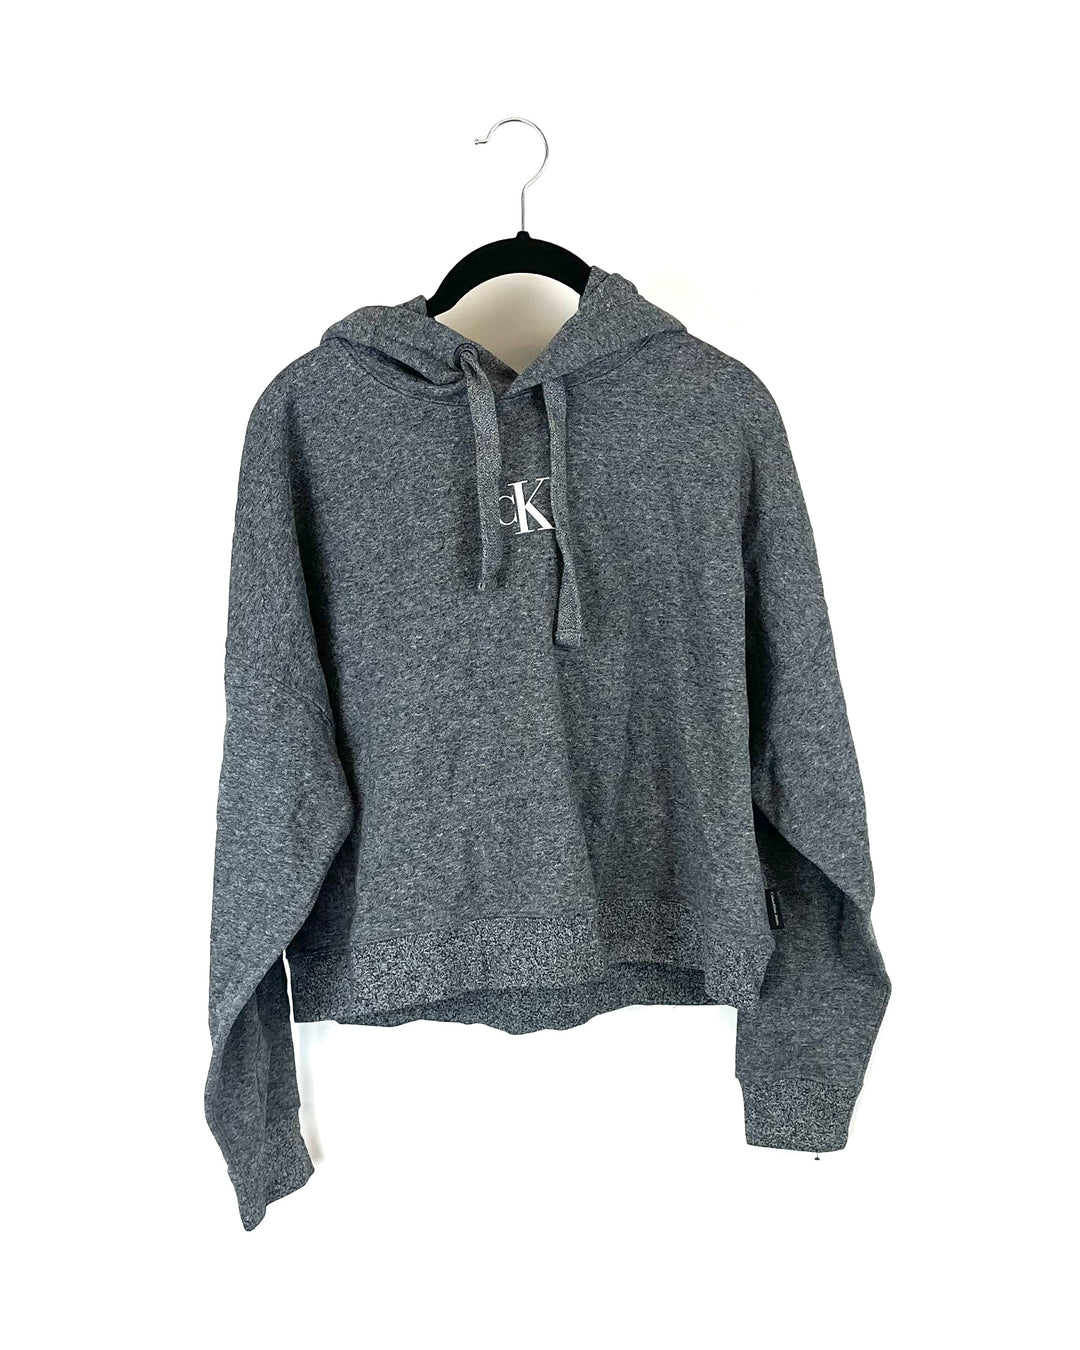 Cropped Heather Gray Hoodie - Small